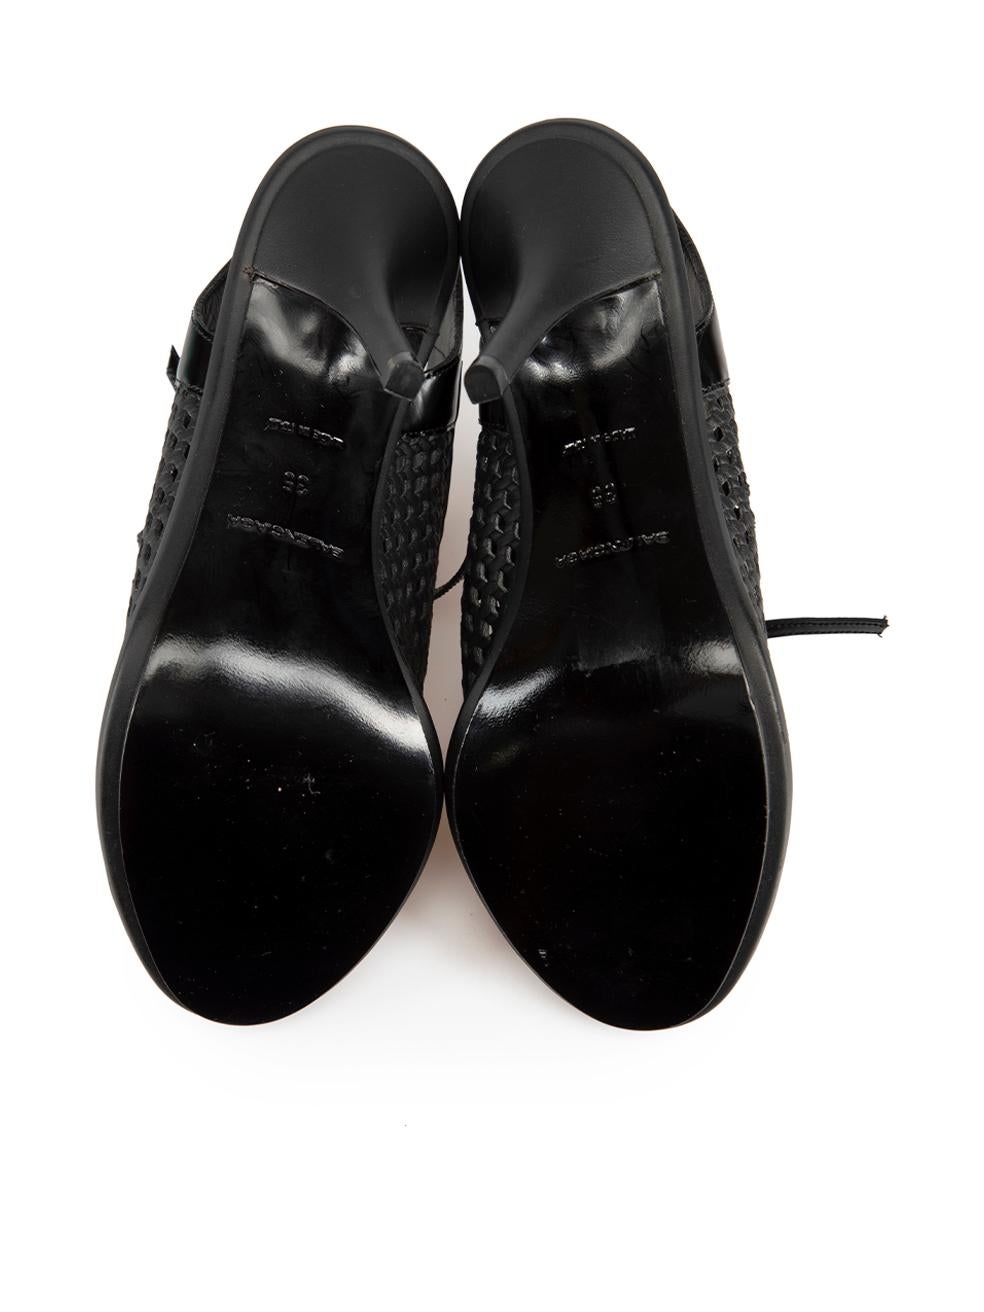 Women's Balenciaga Black Leather Lace-Up Slingback Heels Size IT 35 For Sale